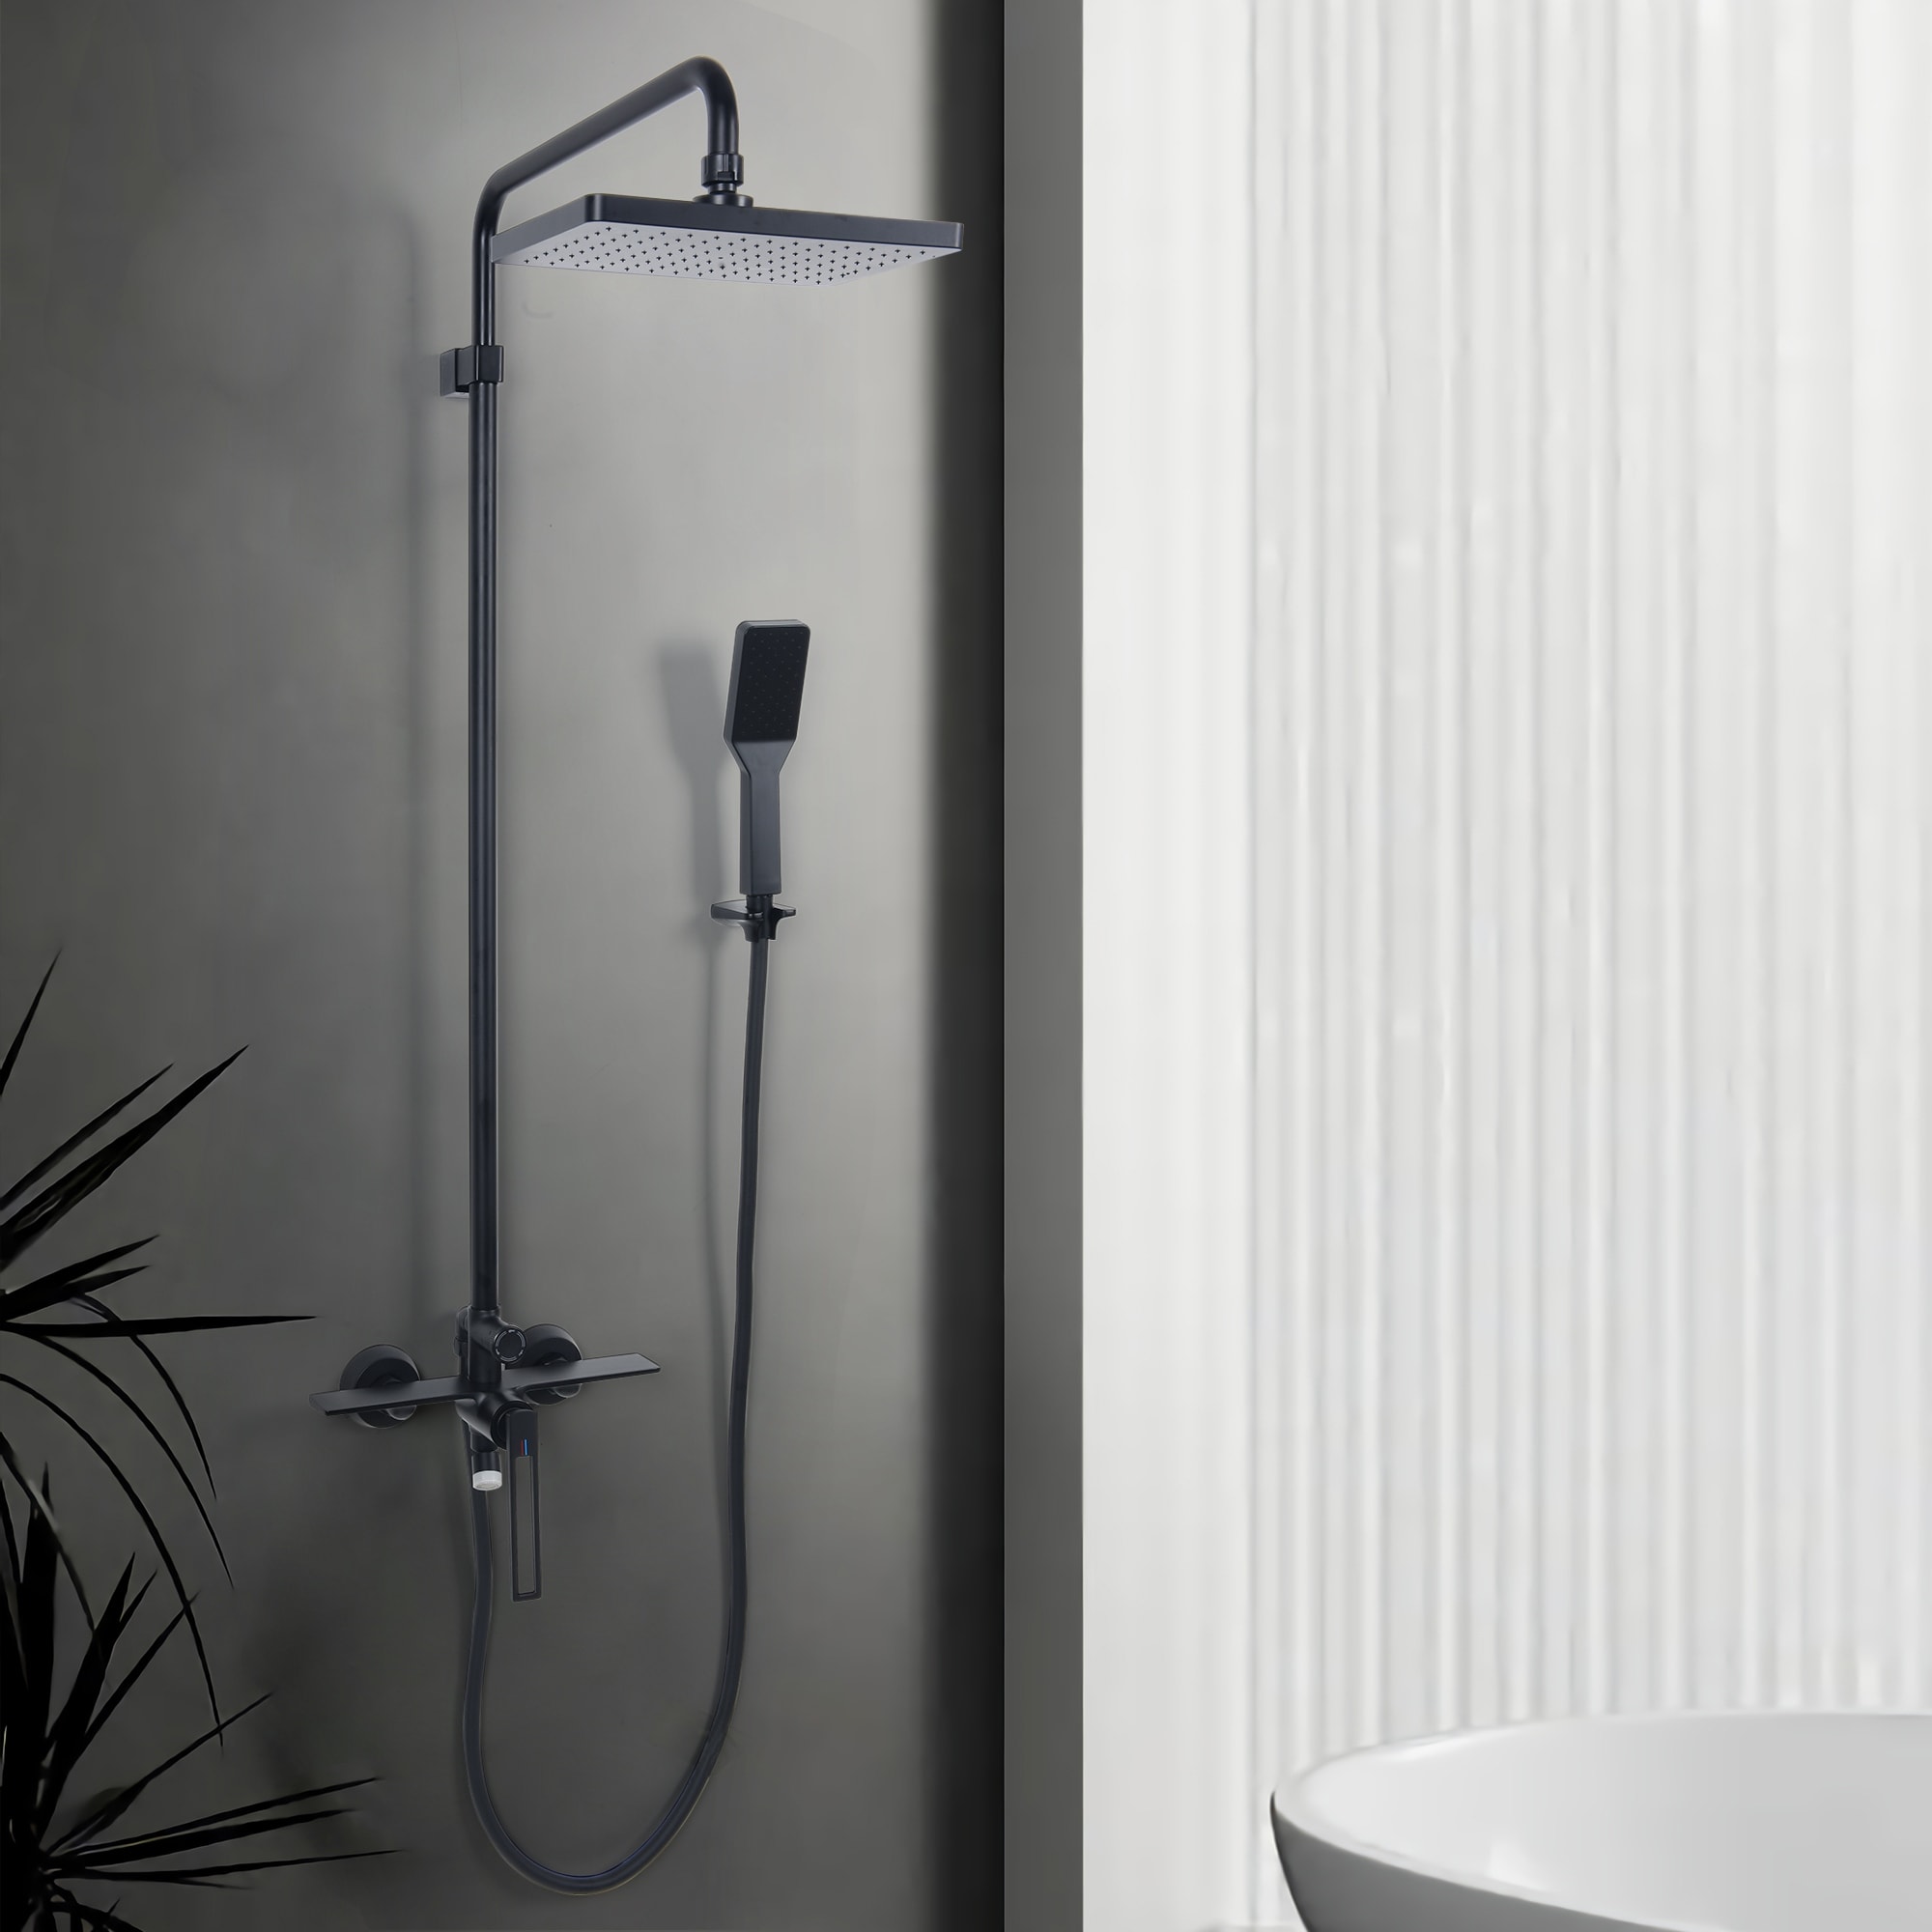 https://ak1.ostkcdn.com/images/products/is/images/direct/799229c21a7a57e703d67fa0daf6fda9e8f5a7f2/Wall-Mounted-Complete-Shower-System-with-Rough-In-Valve.jpg